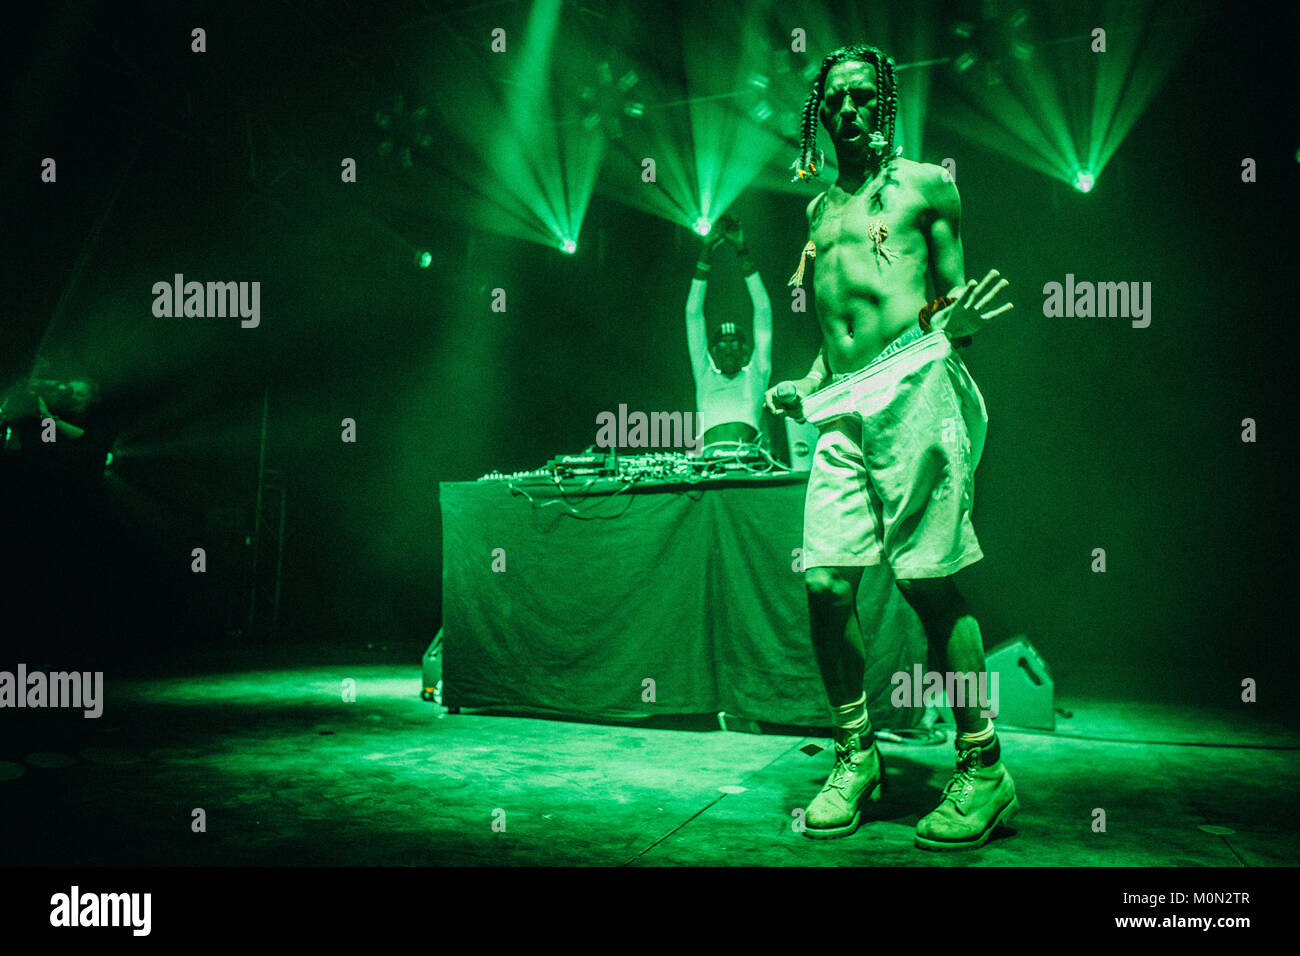 The American queer rapper and performance artist Michael Quattlebaum Jr is better known by his stage name Mykki Blanco and here performs a live concert at the Danish music festival Roskilde Festival 2013. Denmark, 05/07 2013. Stock Photo